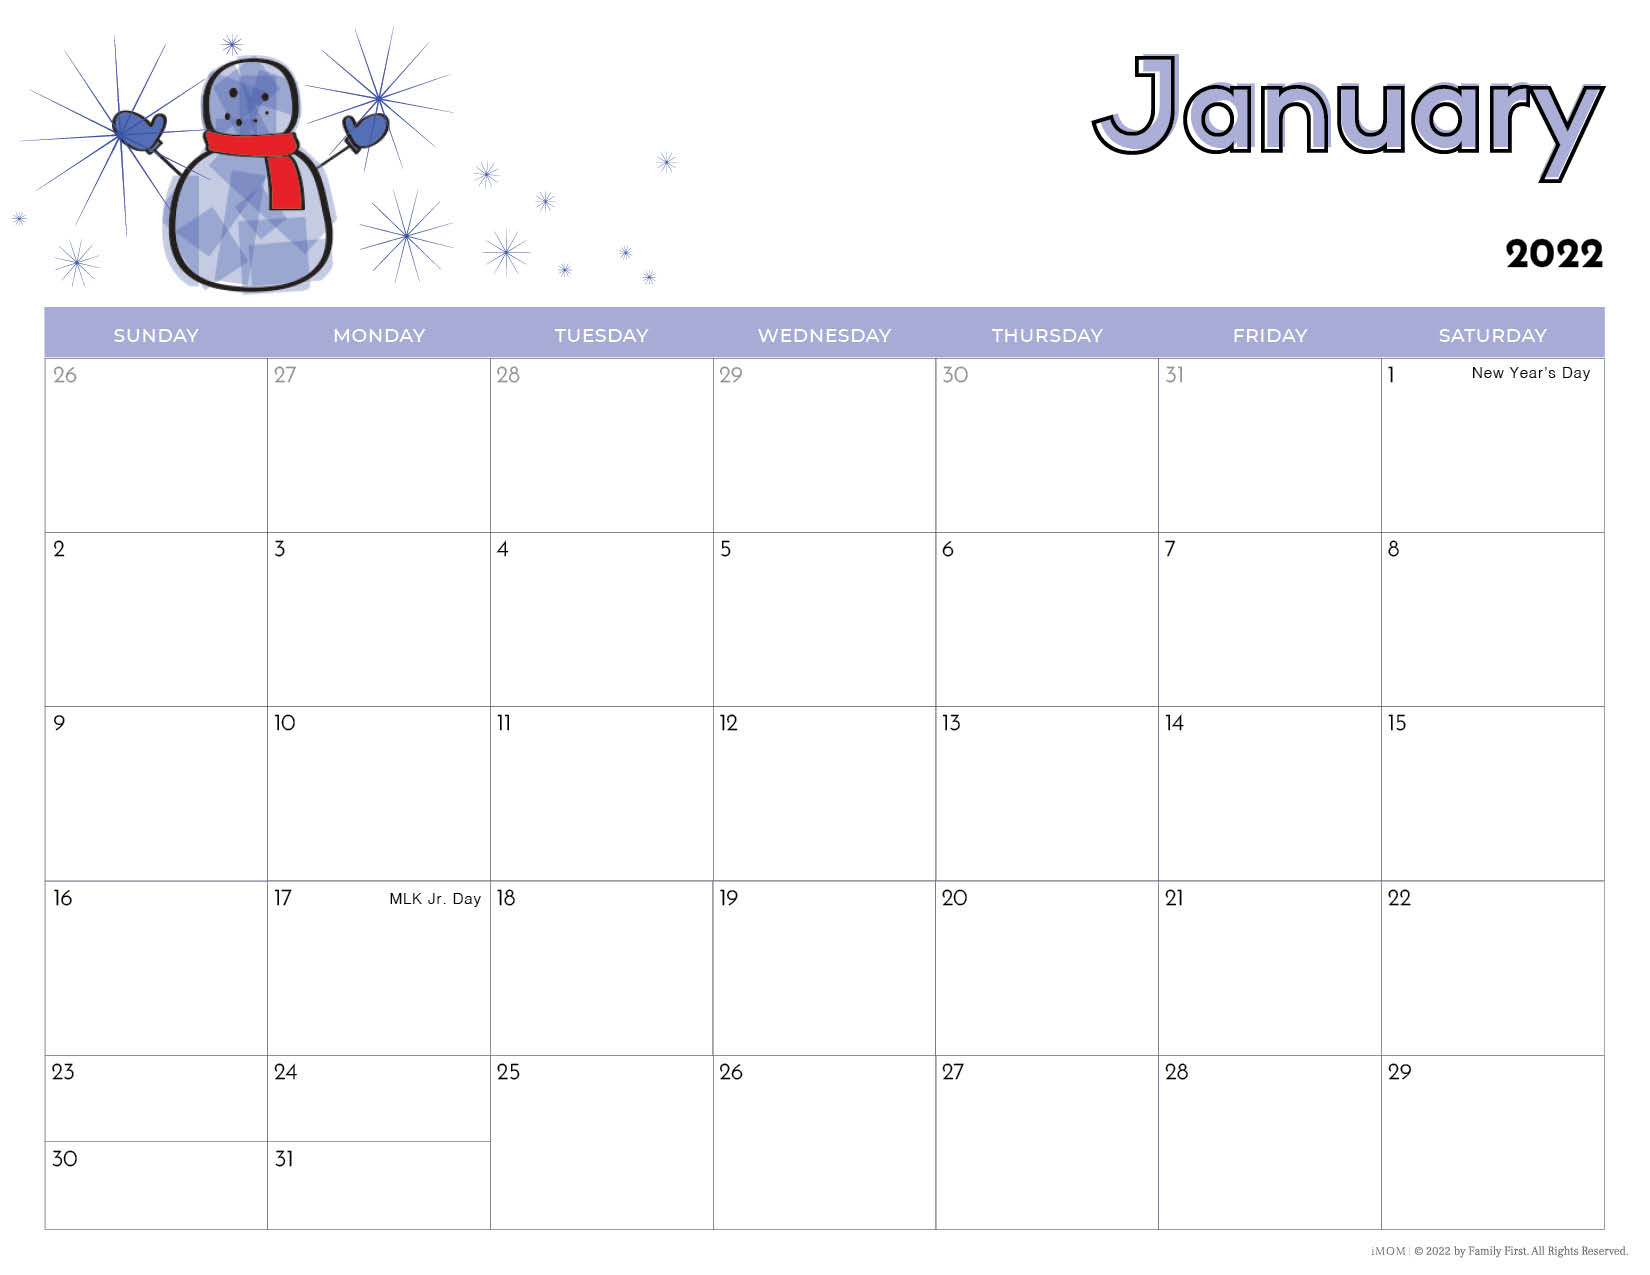 24 and 24 Printable Calendars for Kids - iMOM With Blank Calendar Template For Kids